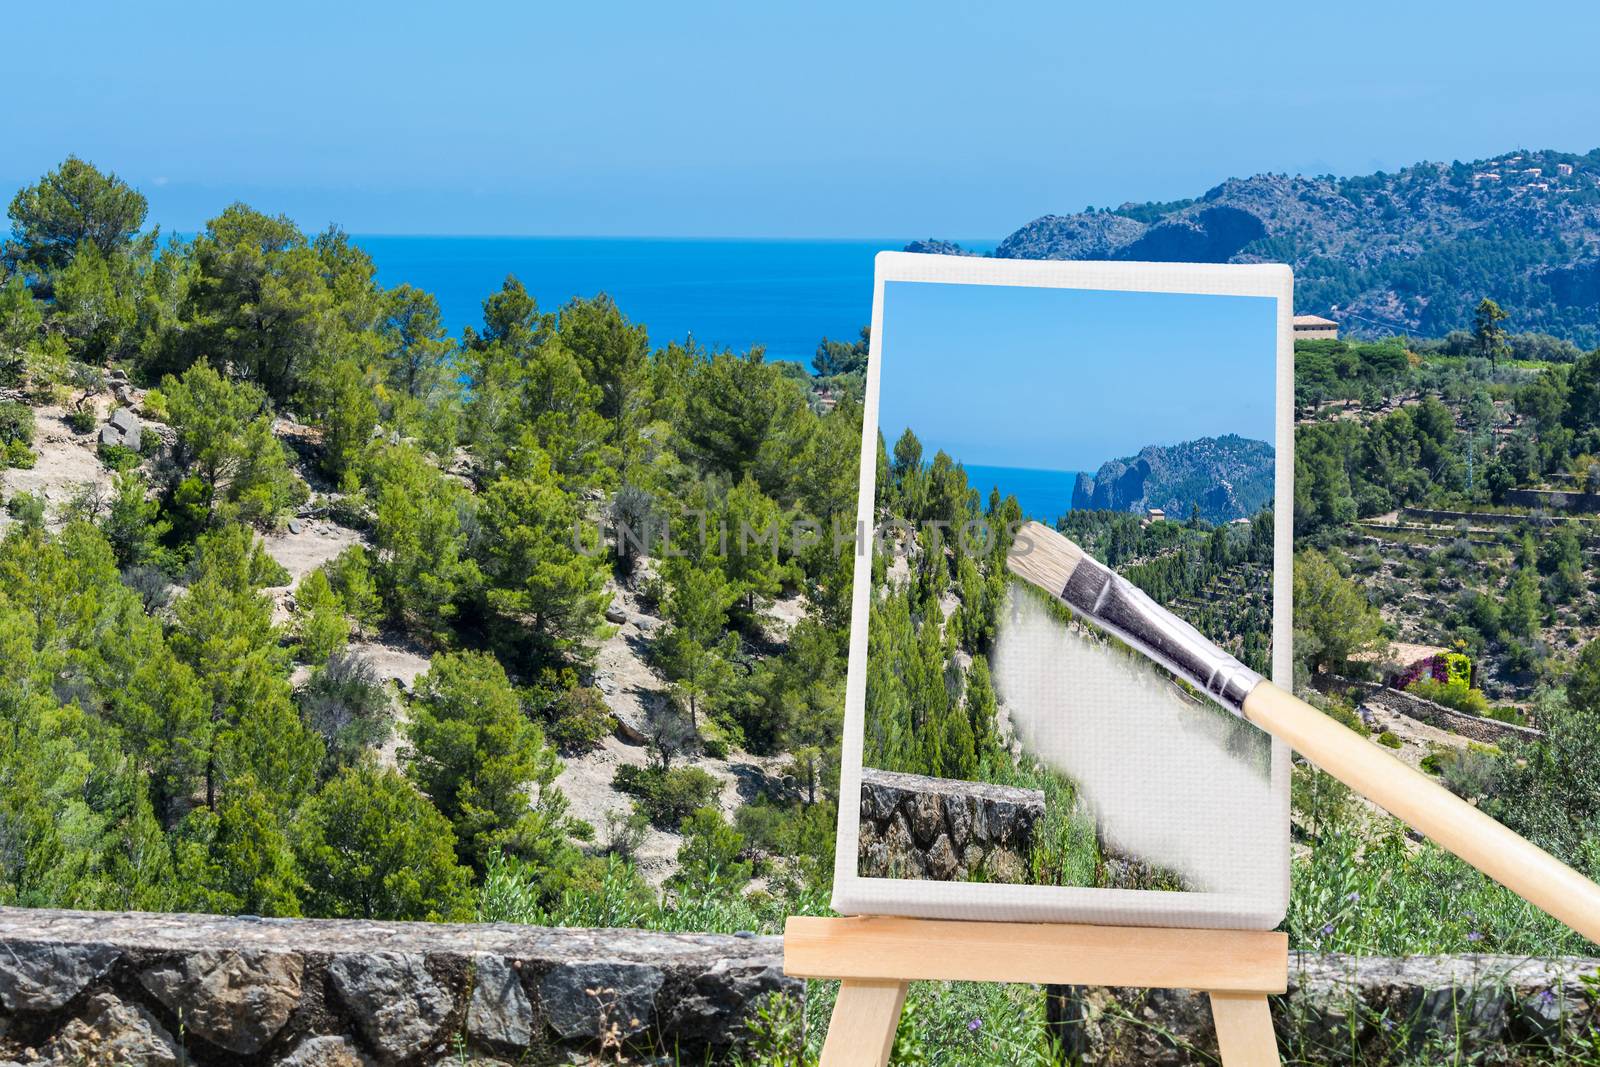 Painted canvas stands on an easel. On the screen, a holiday landscape with ocean in the background.